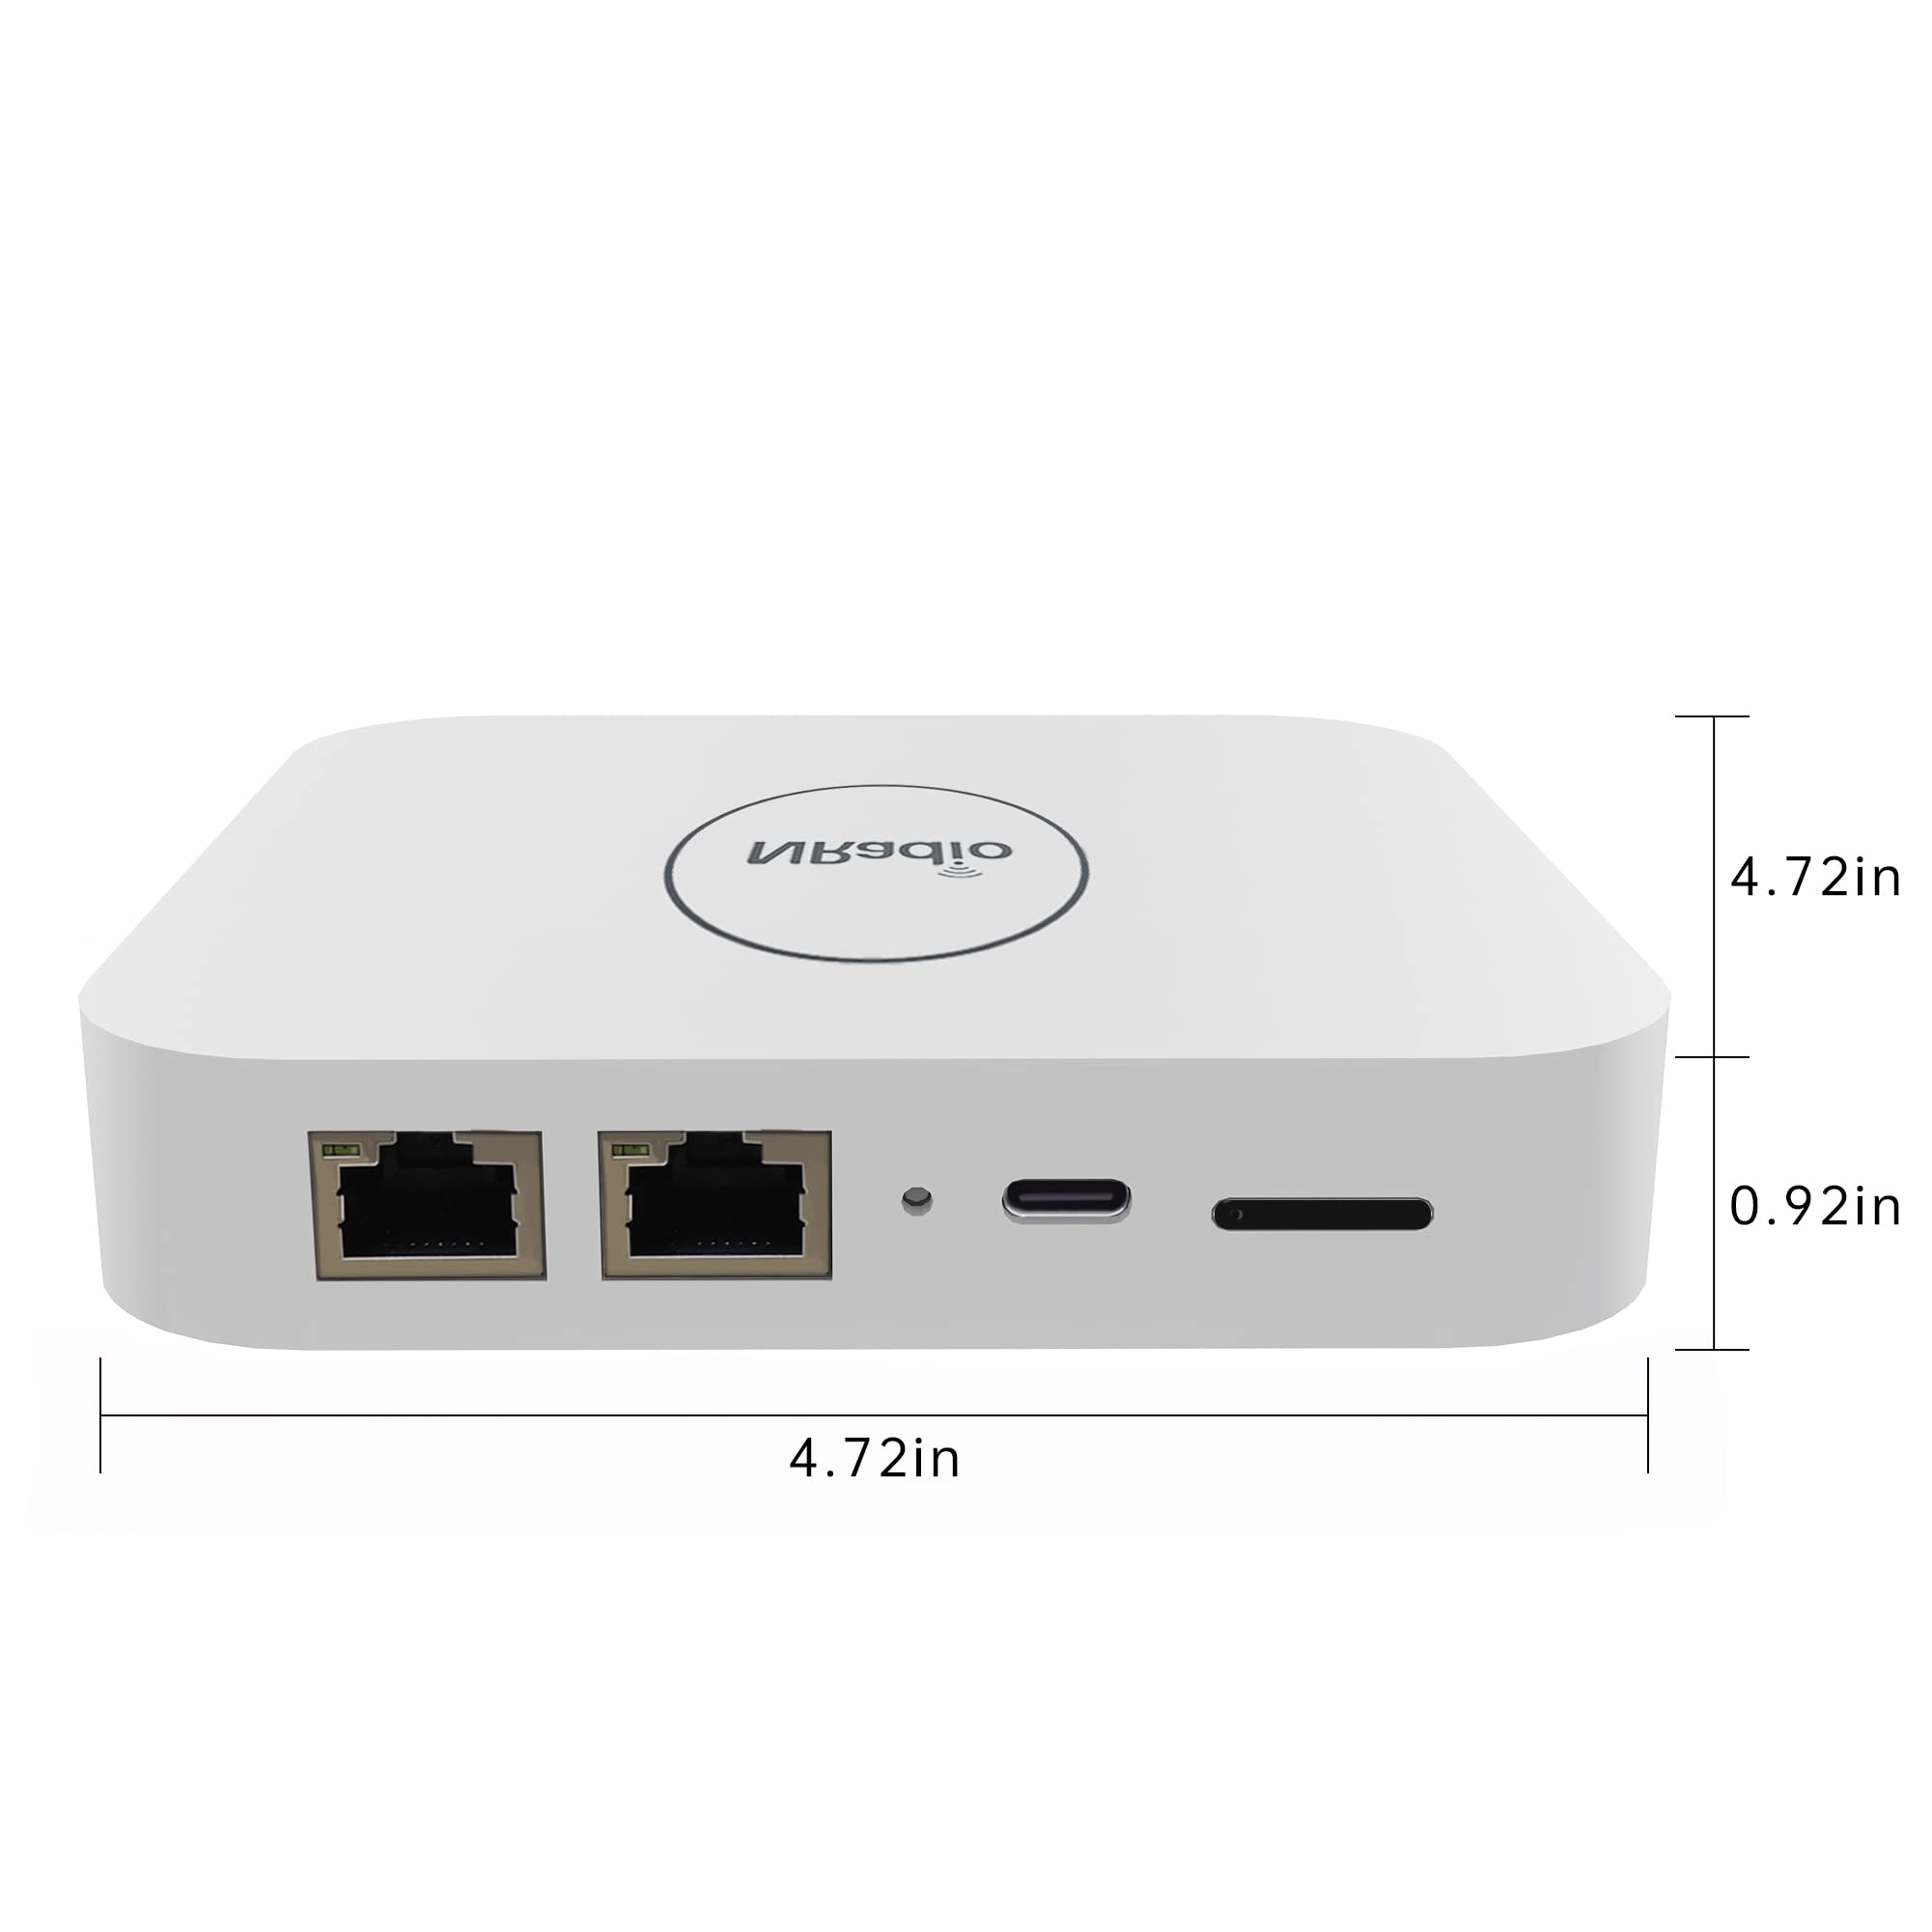 4G LTE Router,NRadio Portable AC1200 Dual Band Unlocked 4G Modem Router with SIM Card Slot,Mini Wireless WiFi Mobile Hotspot for Travel Road Trip Vacation Rentals Camping Gathering.